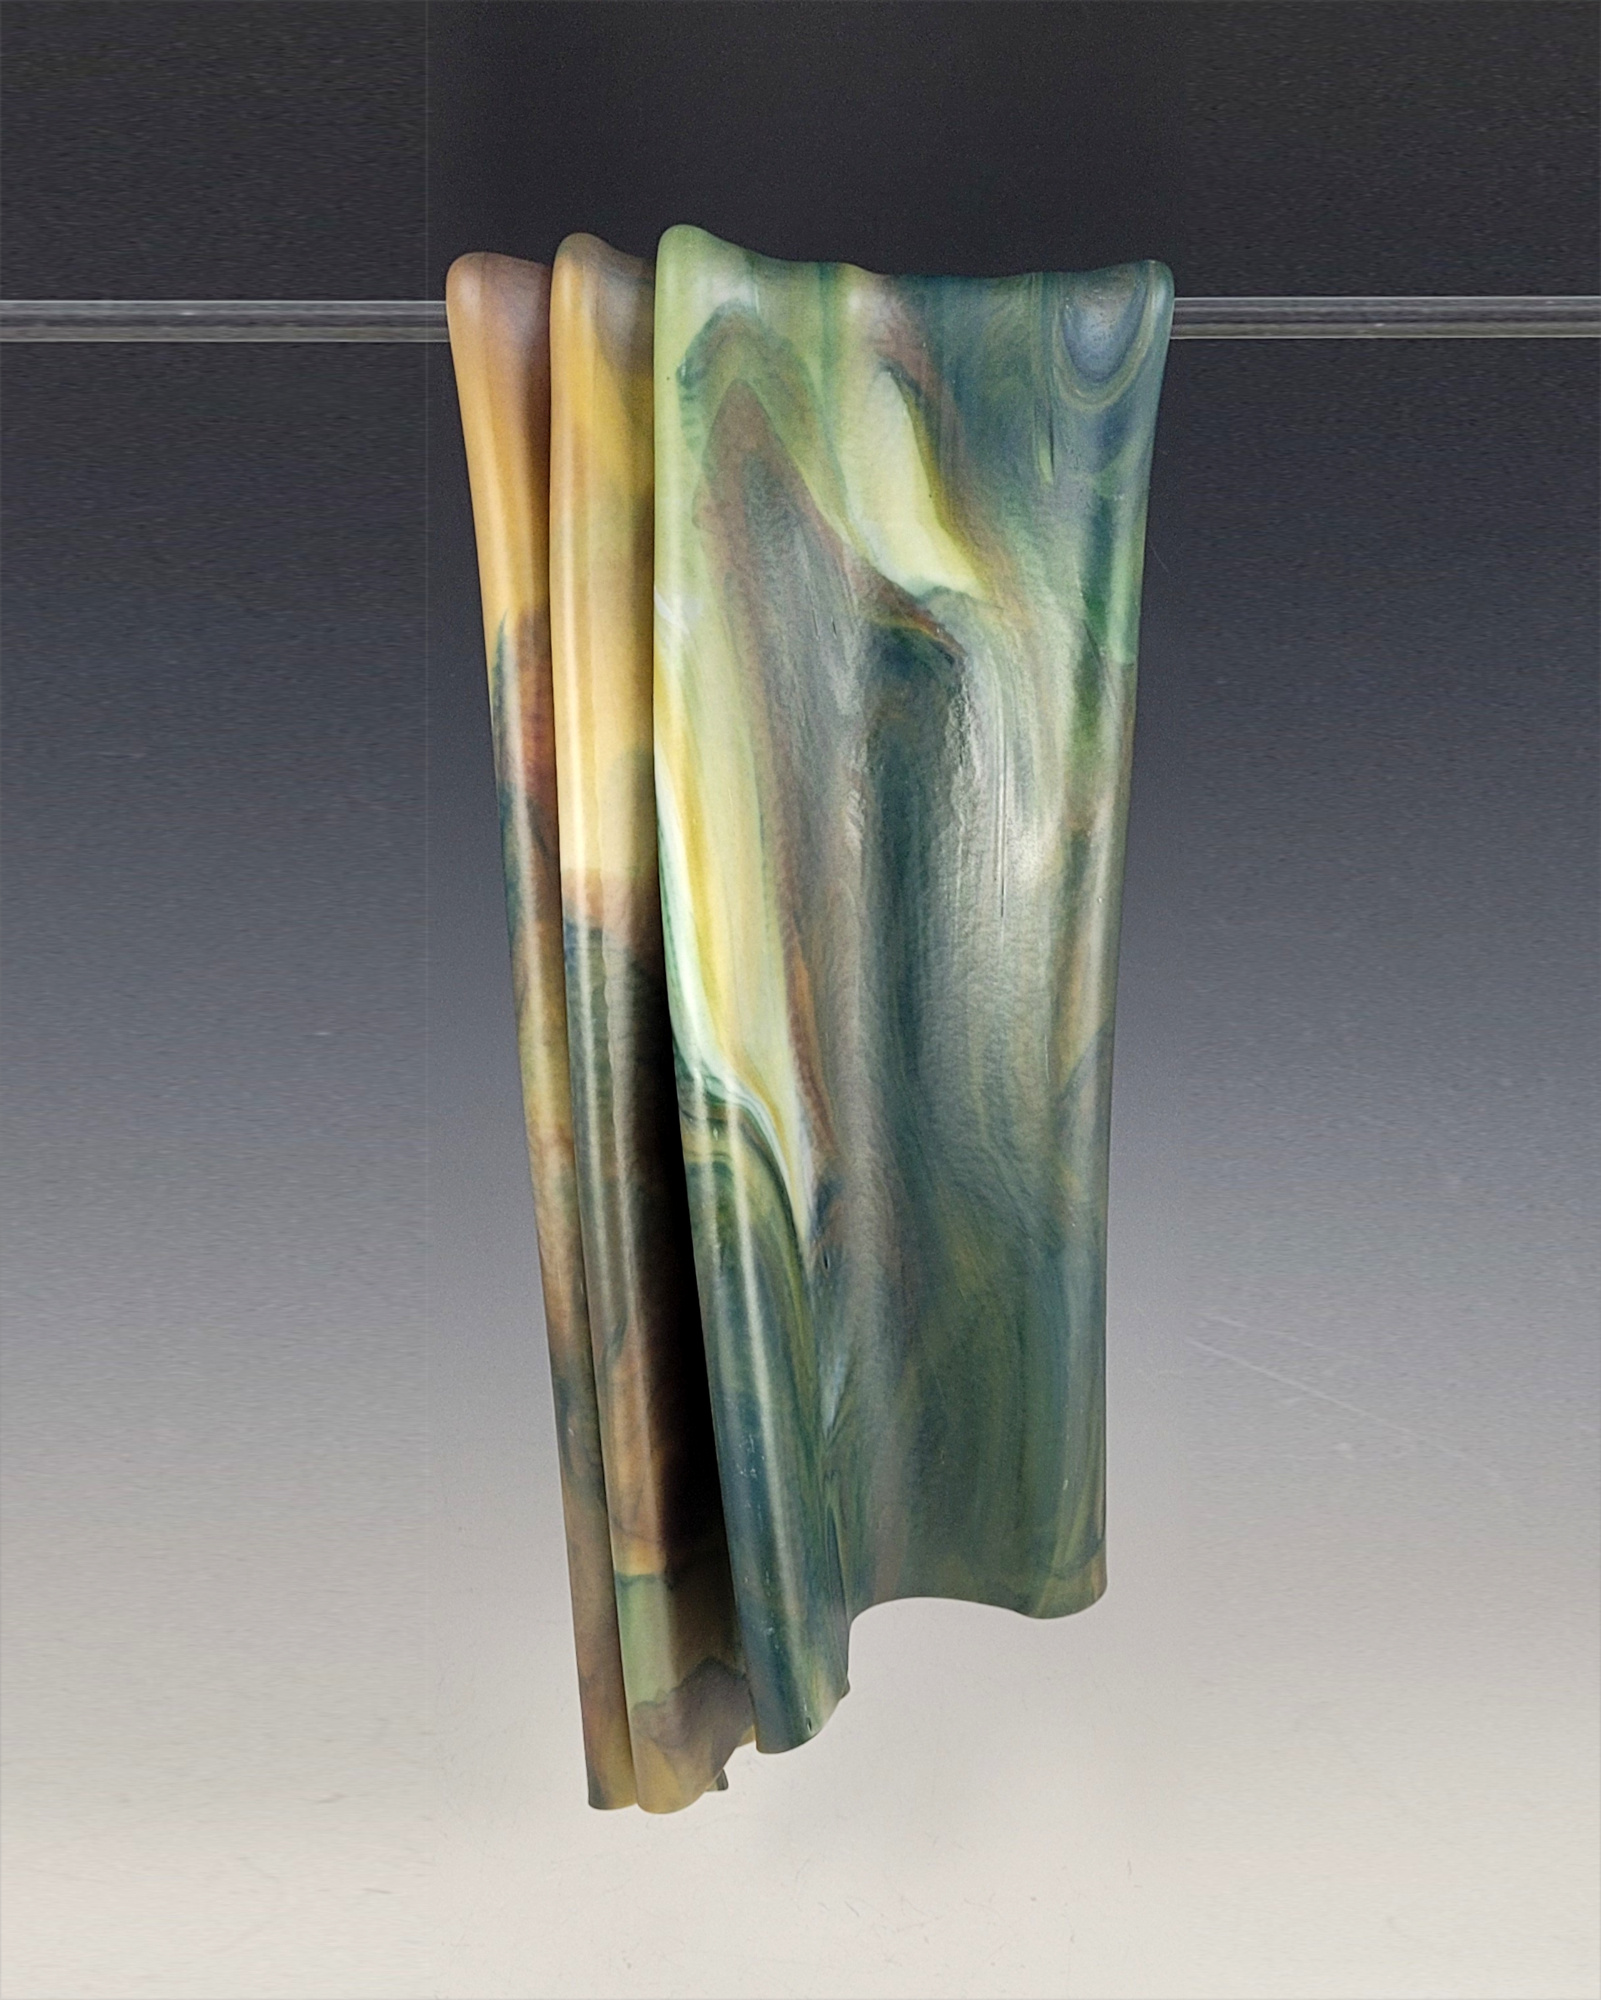 Amber, Green, White Twice-Folded Glass with Hanging System